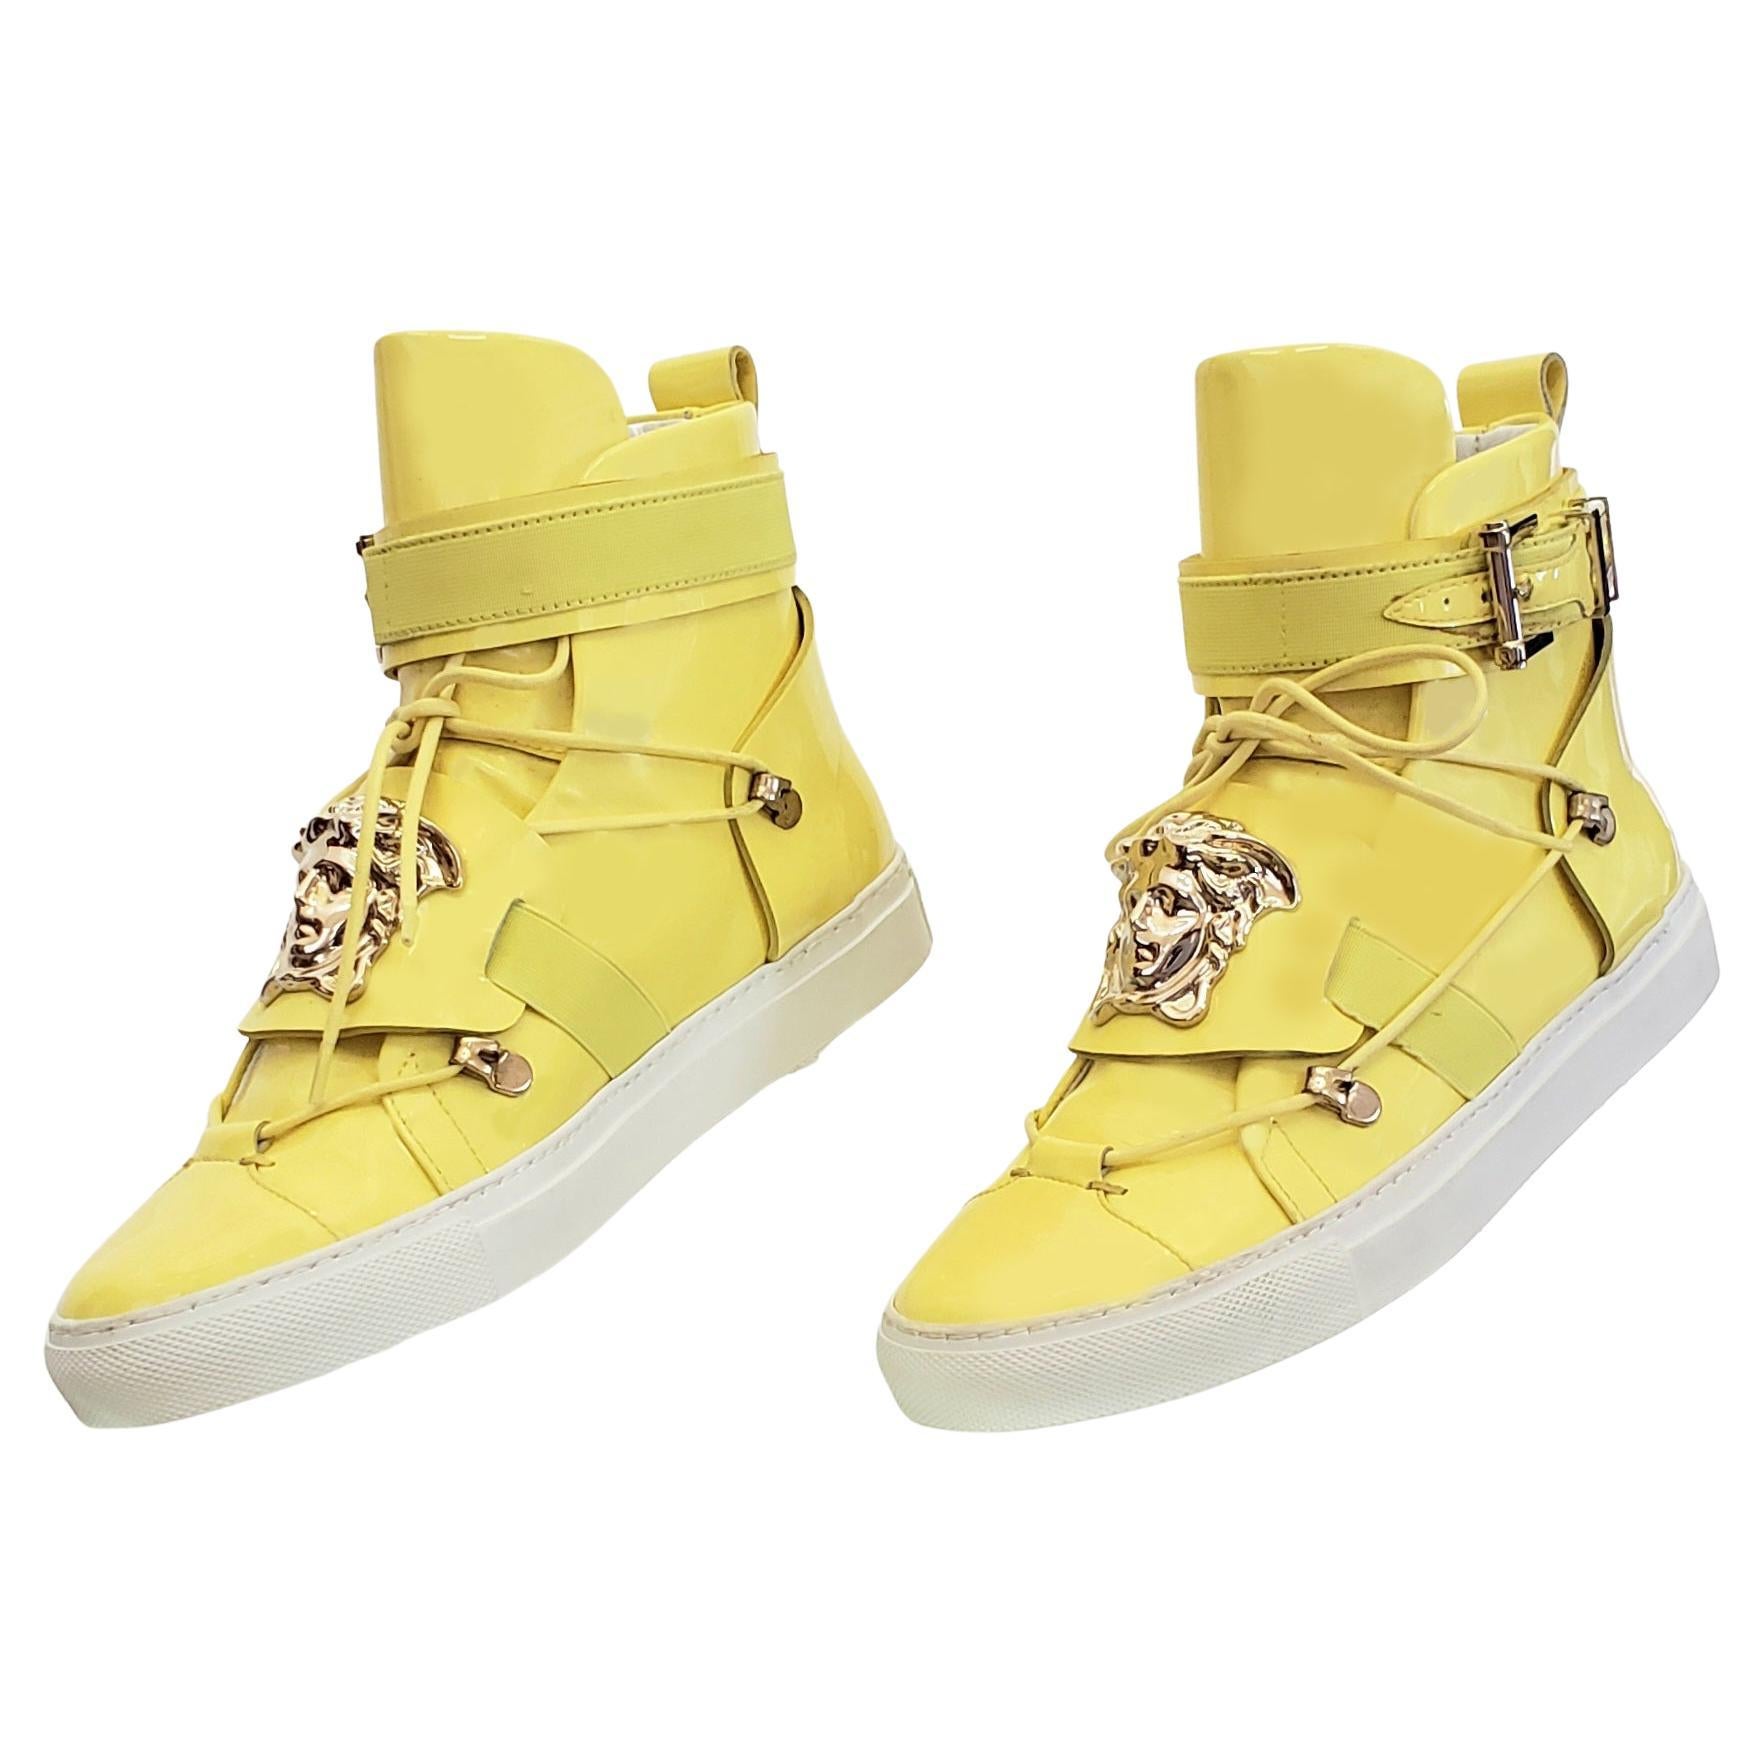 NEW VERSACE YELLOW PATENT LEATHER SNEAKERS w/ GOLD 3D MEDUSA HEAD 36 - 6 For Sale